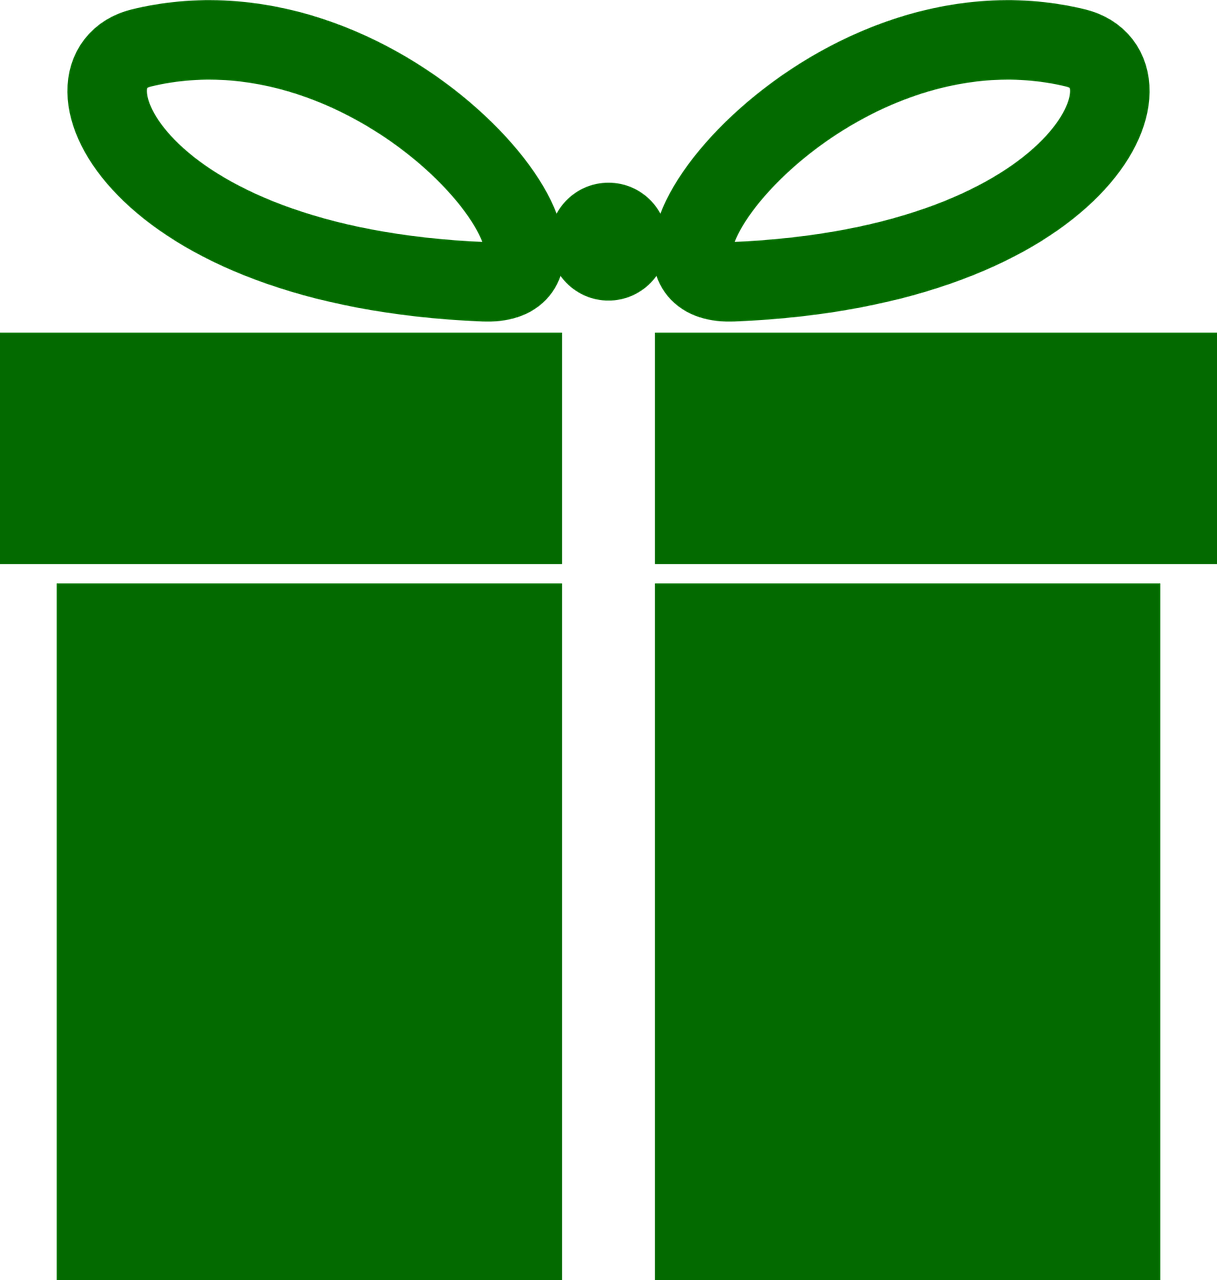 Holiday Gift Sign Up 2017 Deadline November 25th - Gift Icon Green (1217x1280)